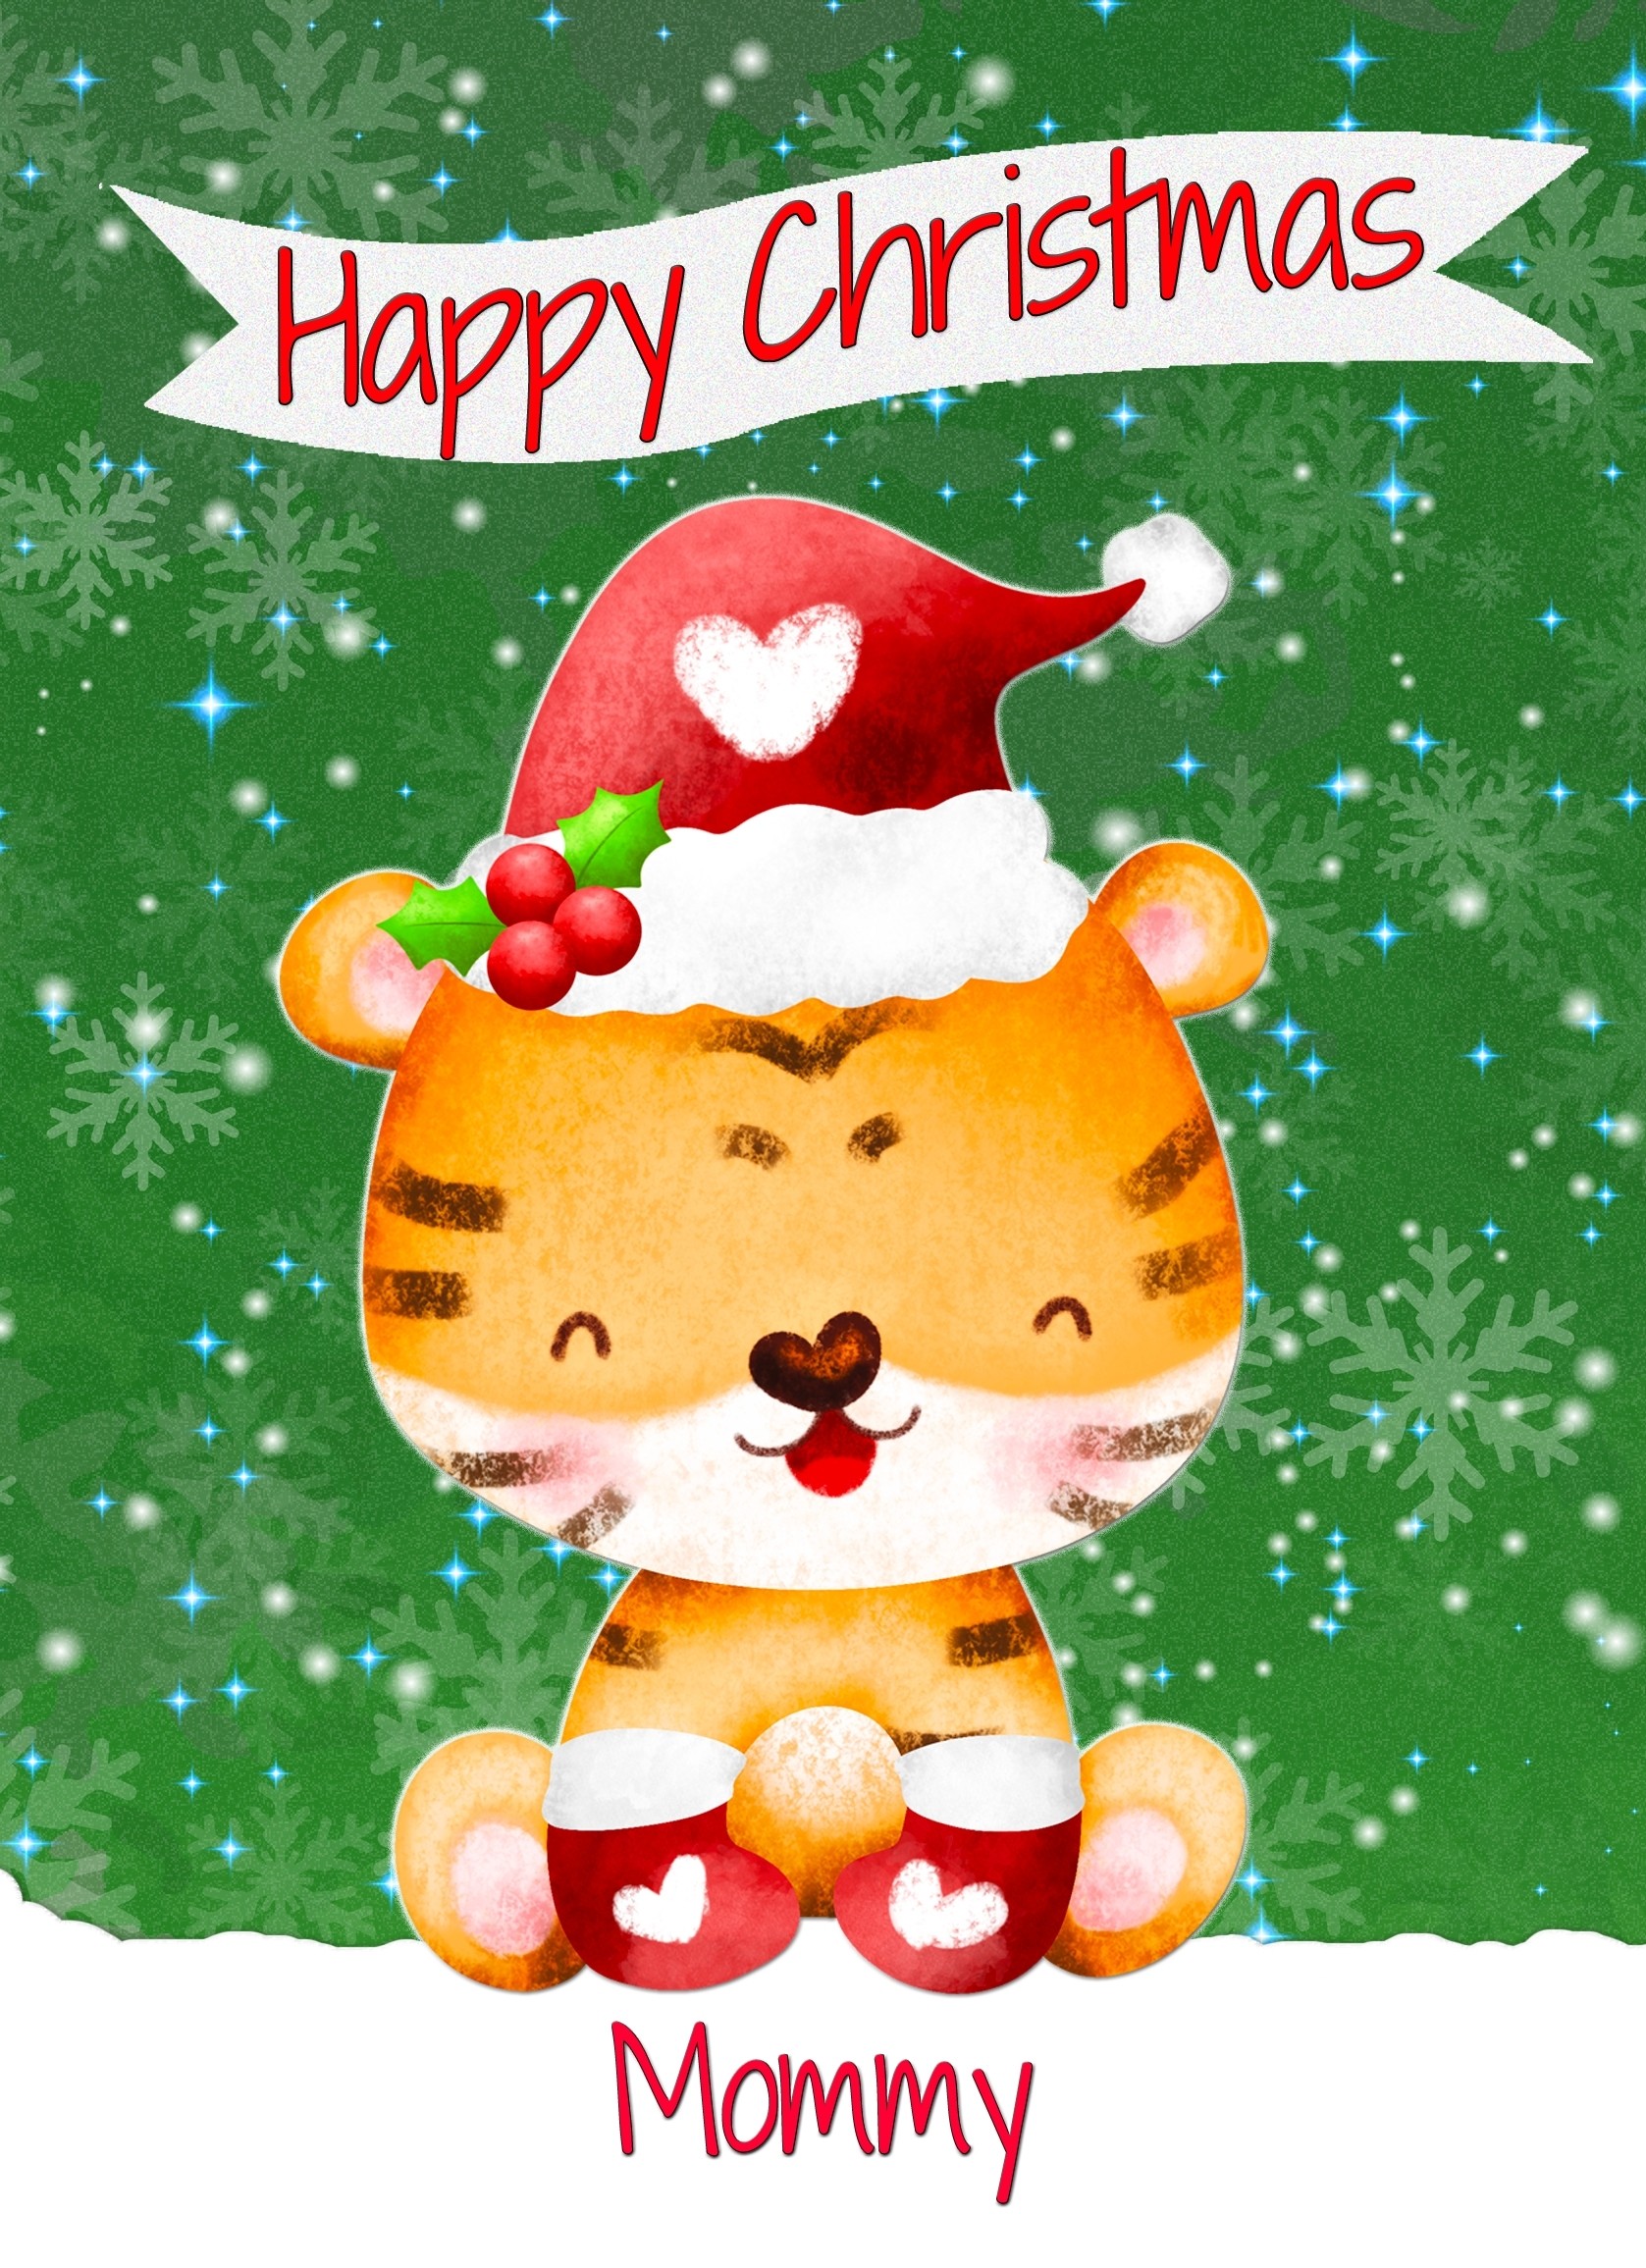 Christmas Card For Mommy (Happy Christmas, Tiger)